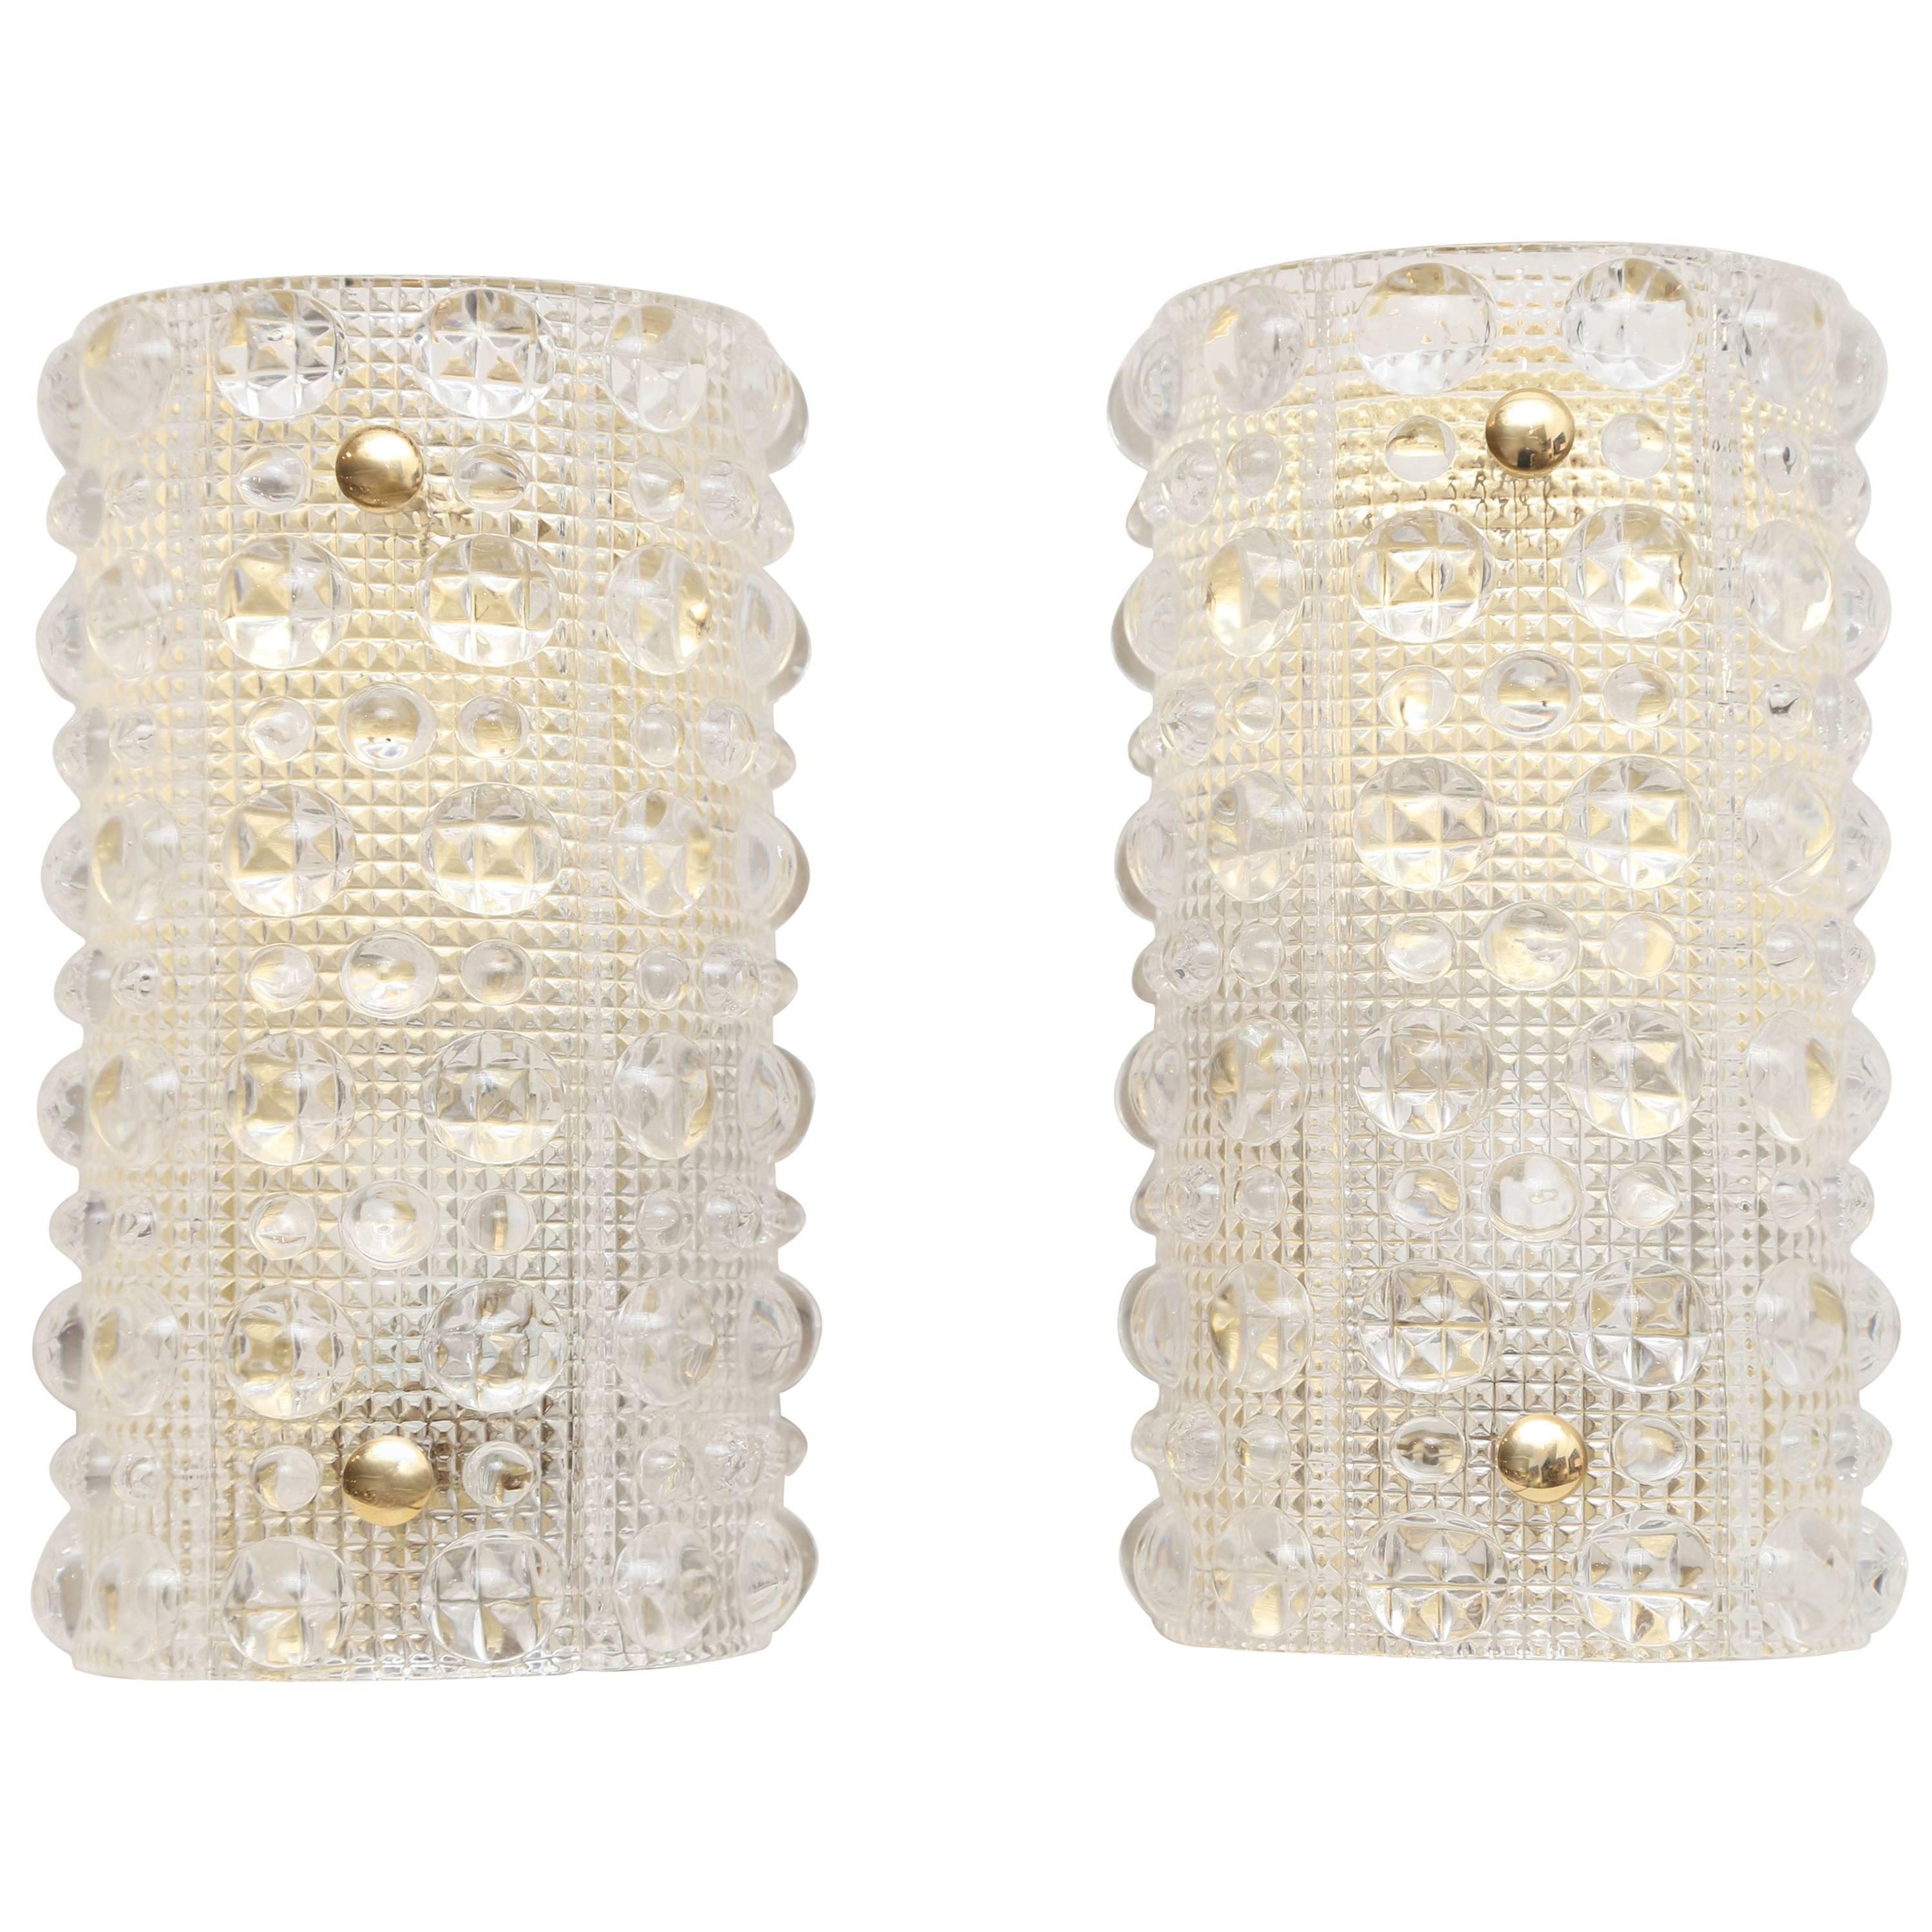 Pair of Carl Fagerlund for Orrefors Sweden Crystal Wall Sconces, circa 1960s For Sale